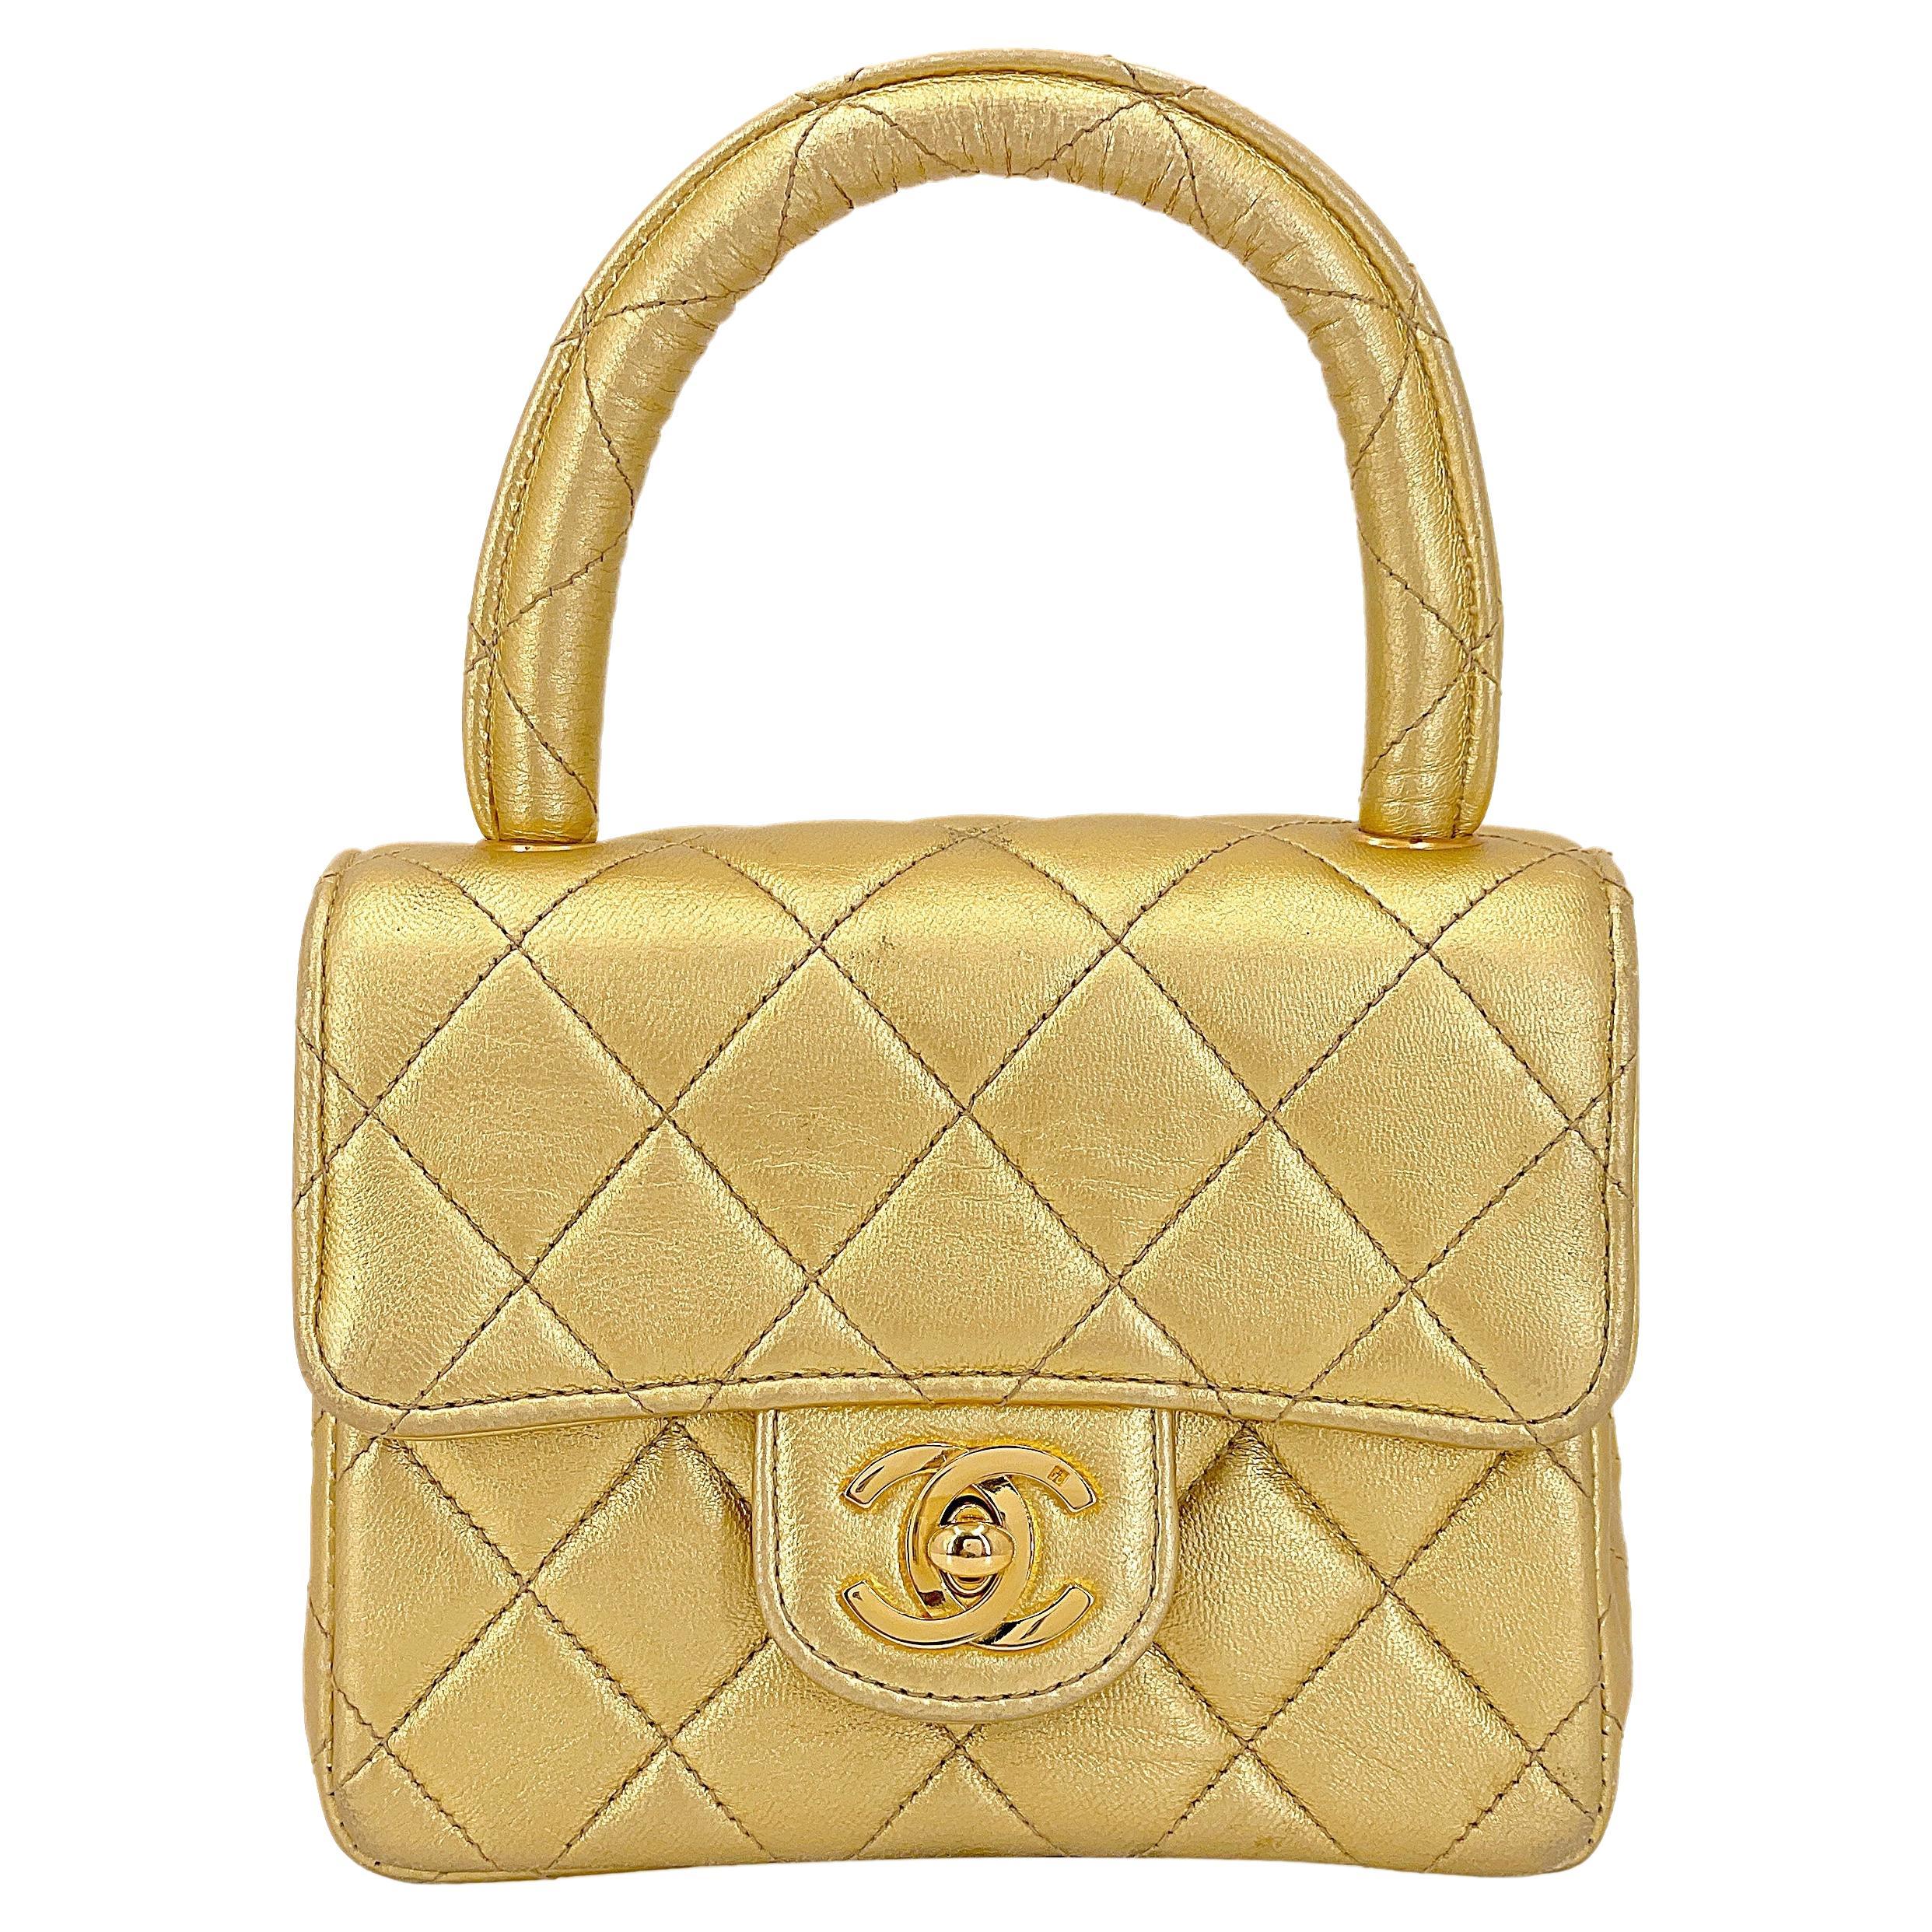 Chanel 1994 Vintage Gold “Child” Extra Square Mini Kelly Bag 67404 For Sale